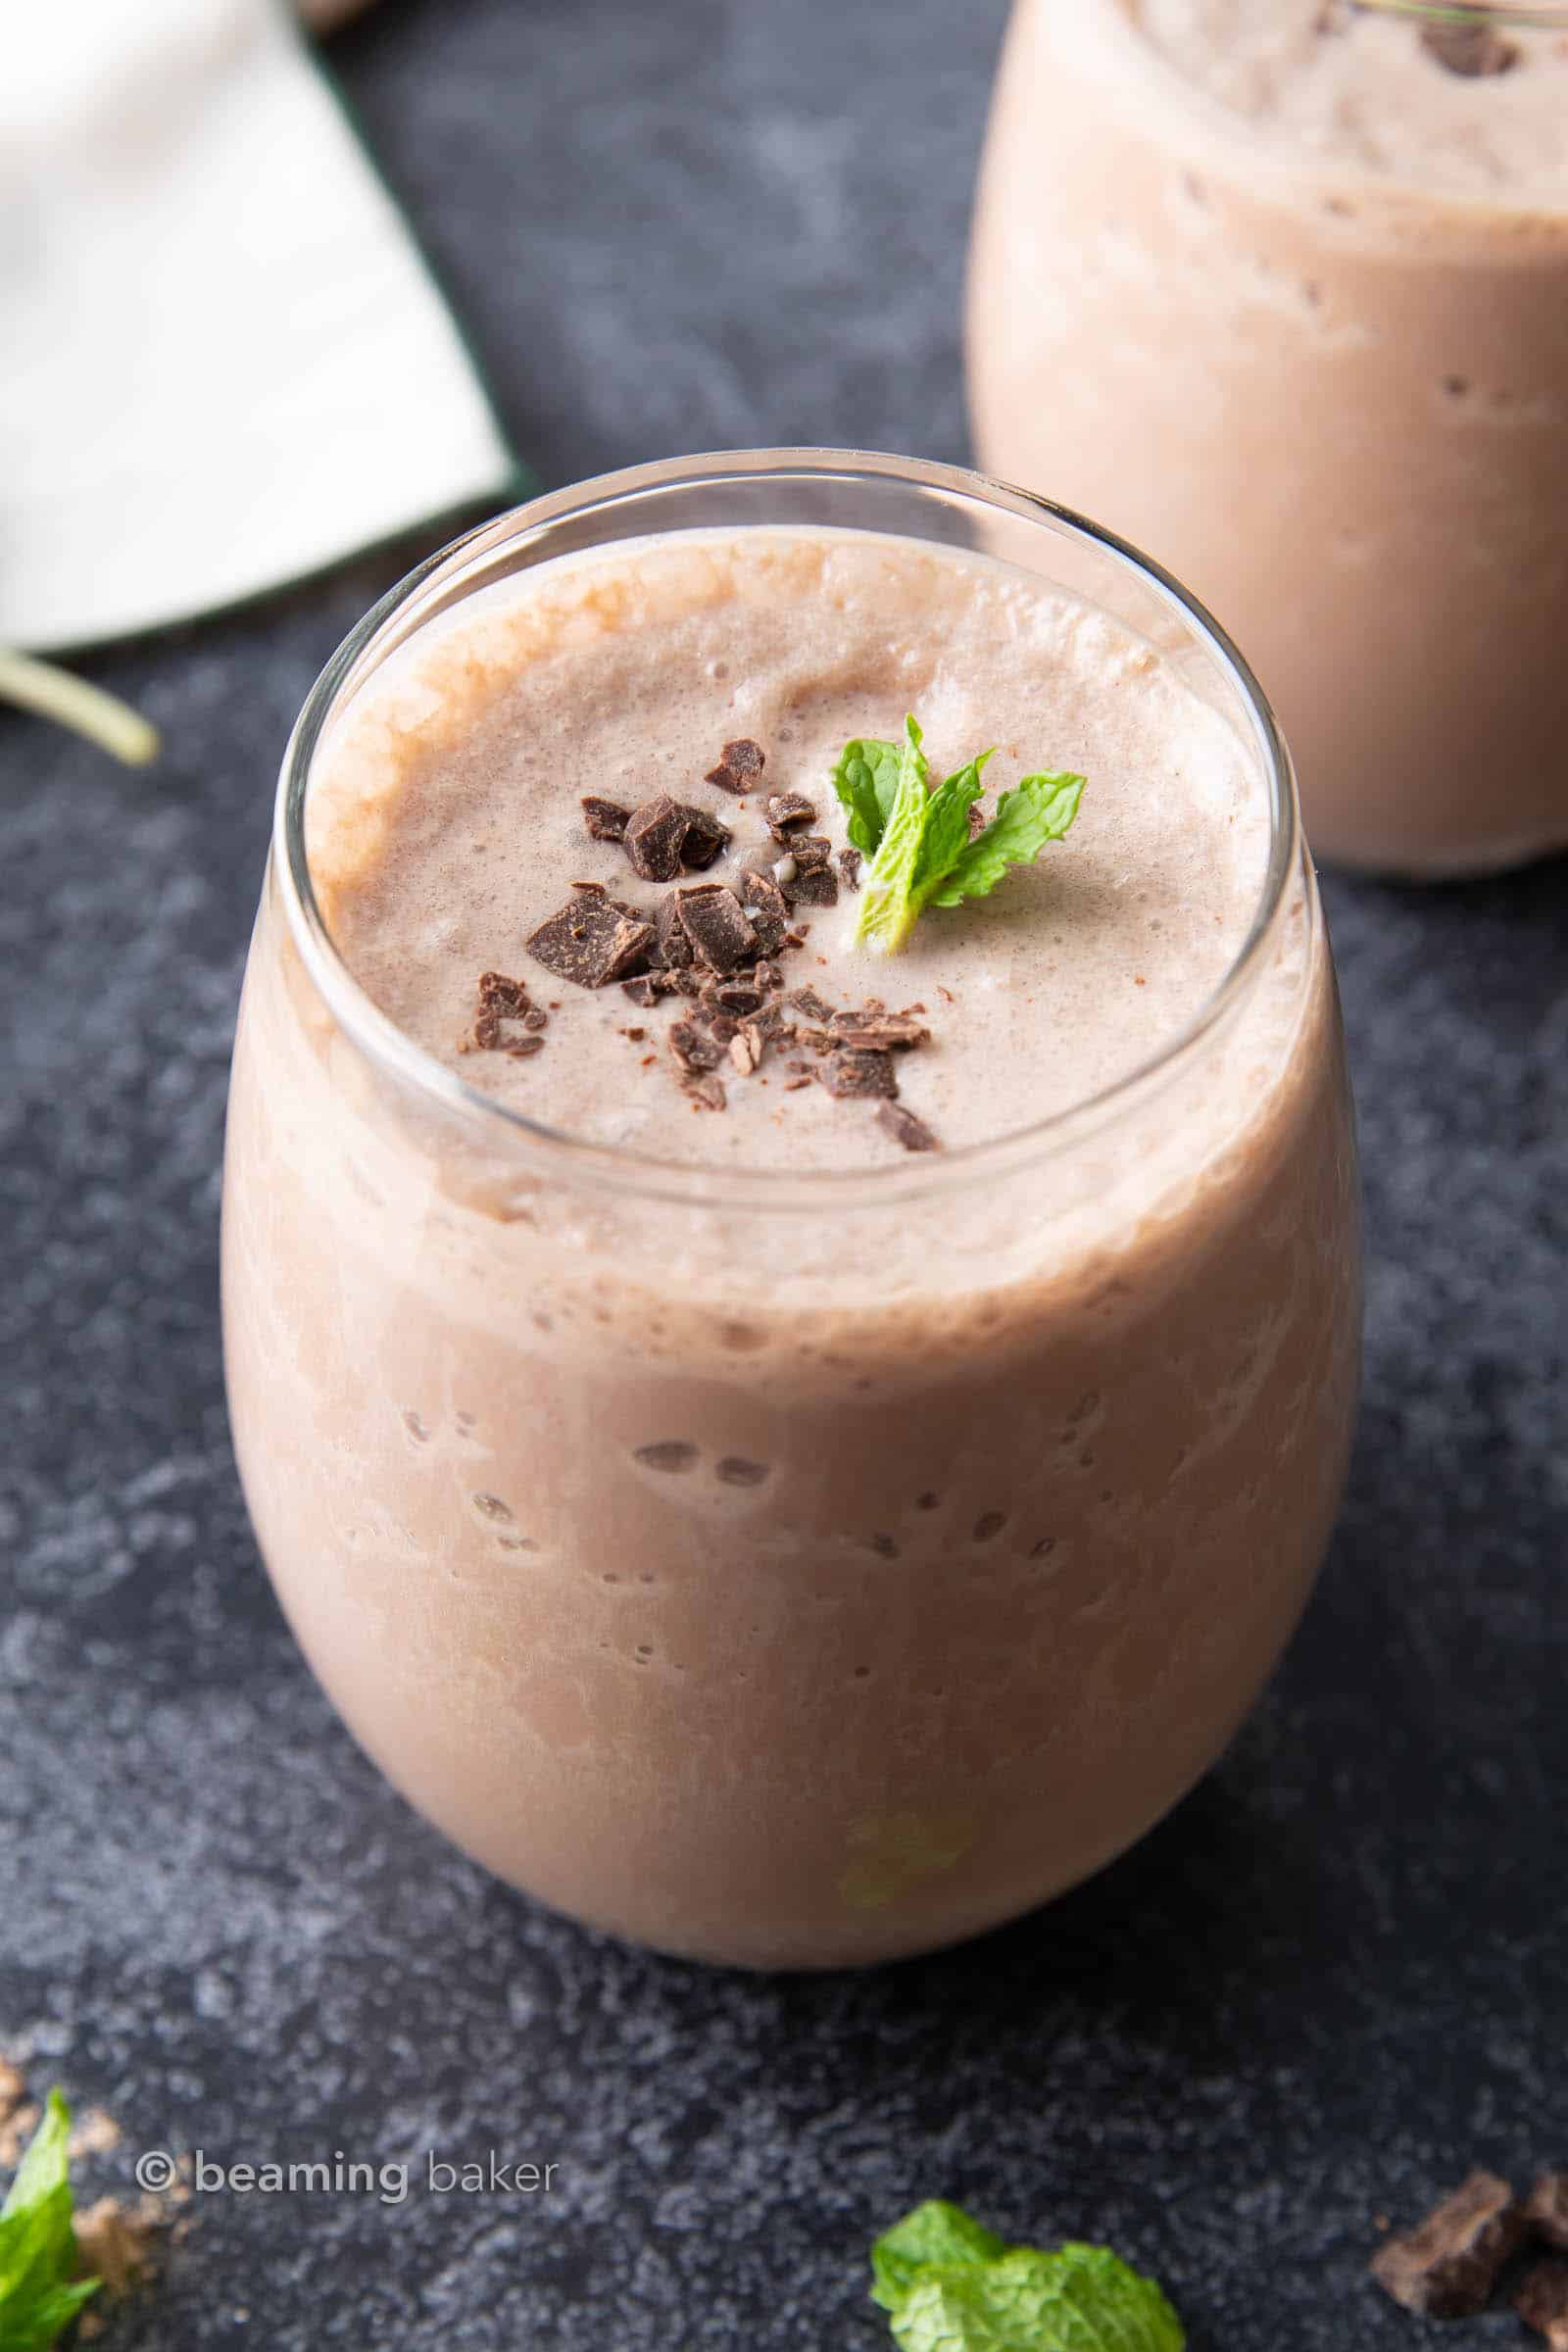 Mint Chocolate Protein Shake: an easy, 6 ingredient recipe for a refreshing High-Protein shake! Plant-based, 23g grams of protein per serving. #HighProtein #Shake #Mint #Chocolate | Recipe at BeamingBaker.com